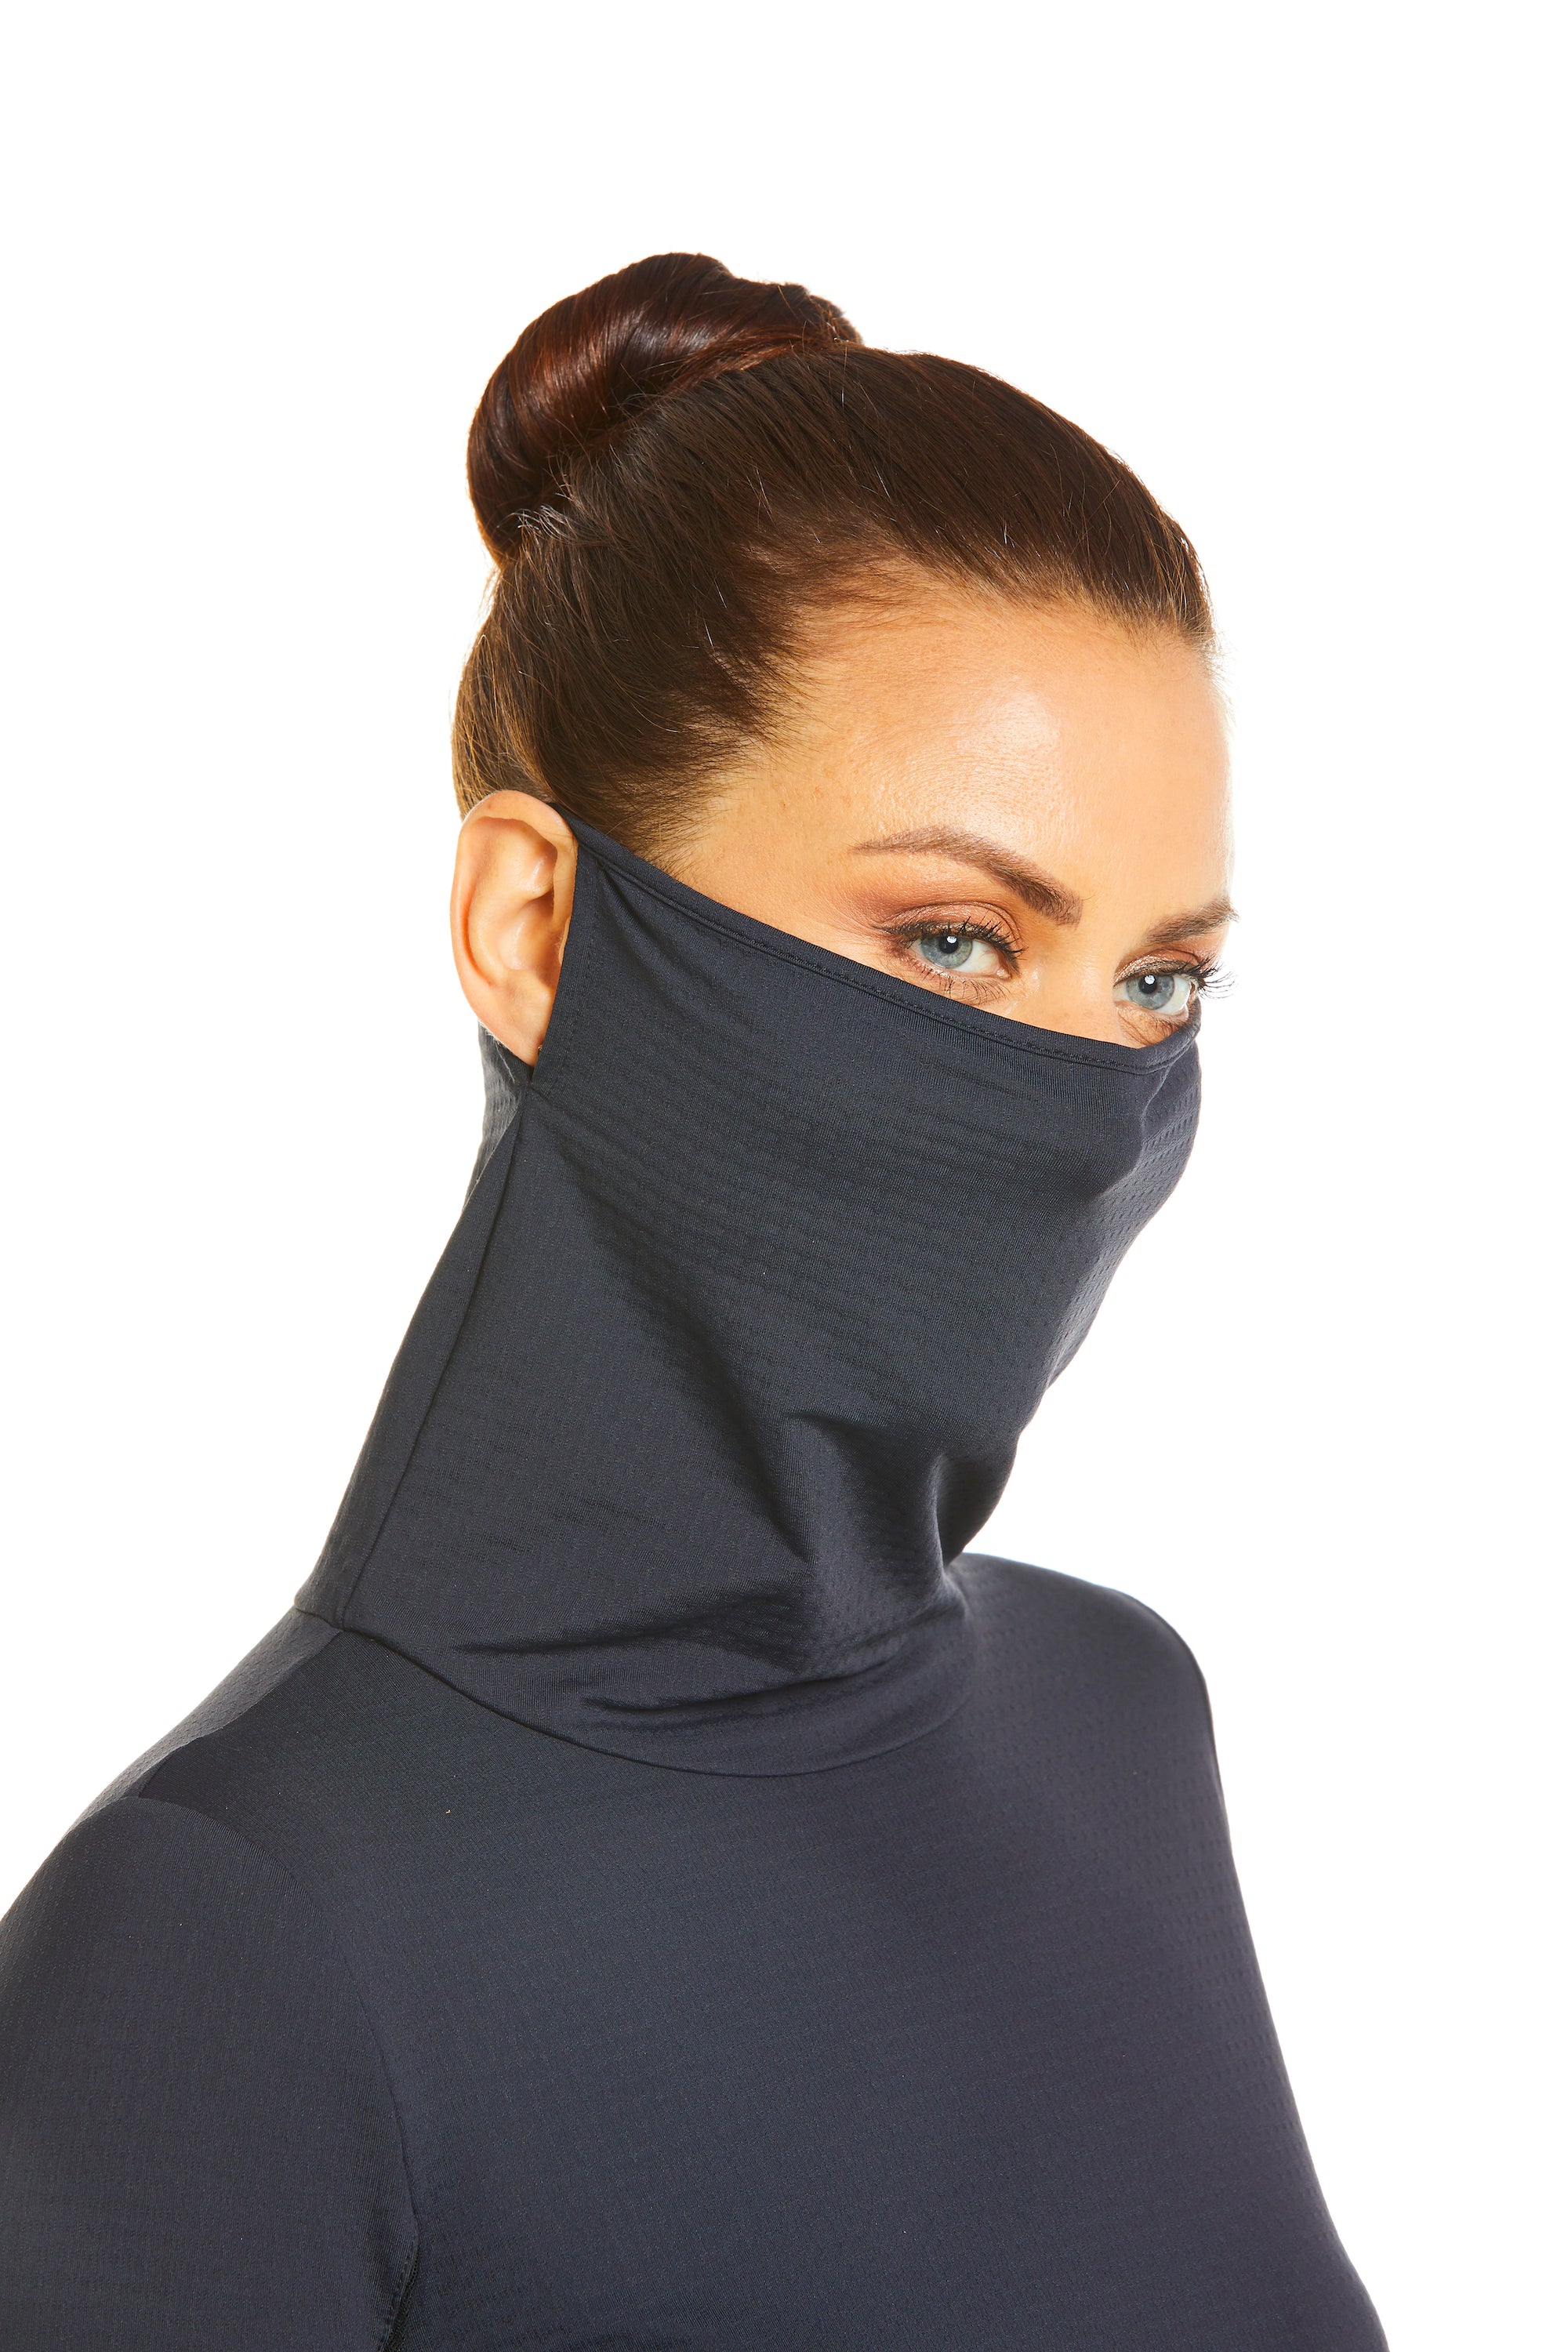 Our IBKareFUL top features a built-in neck gaiter to protect you from the sun and airborne allergens.